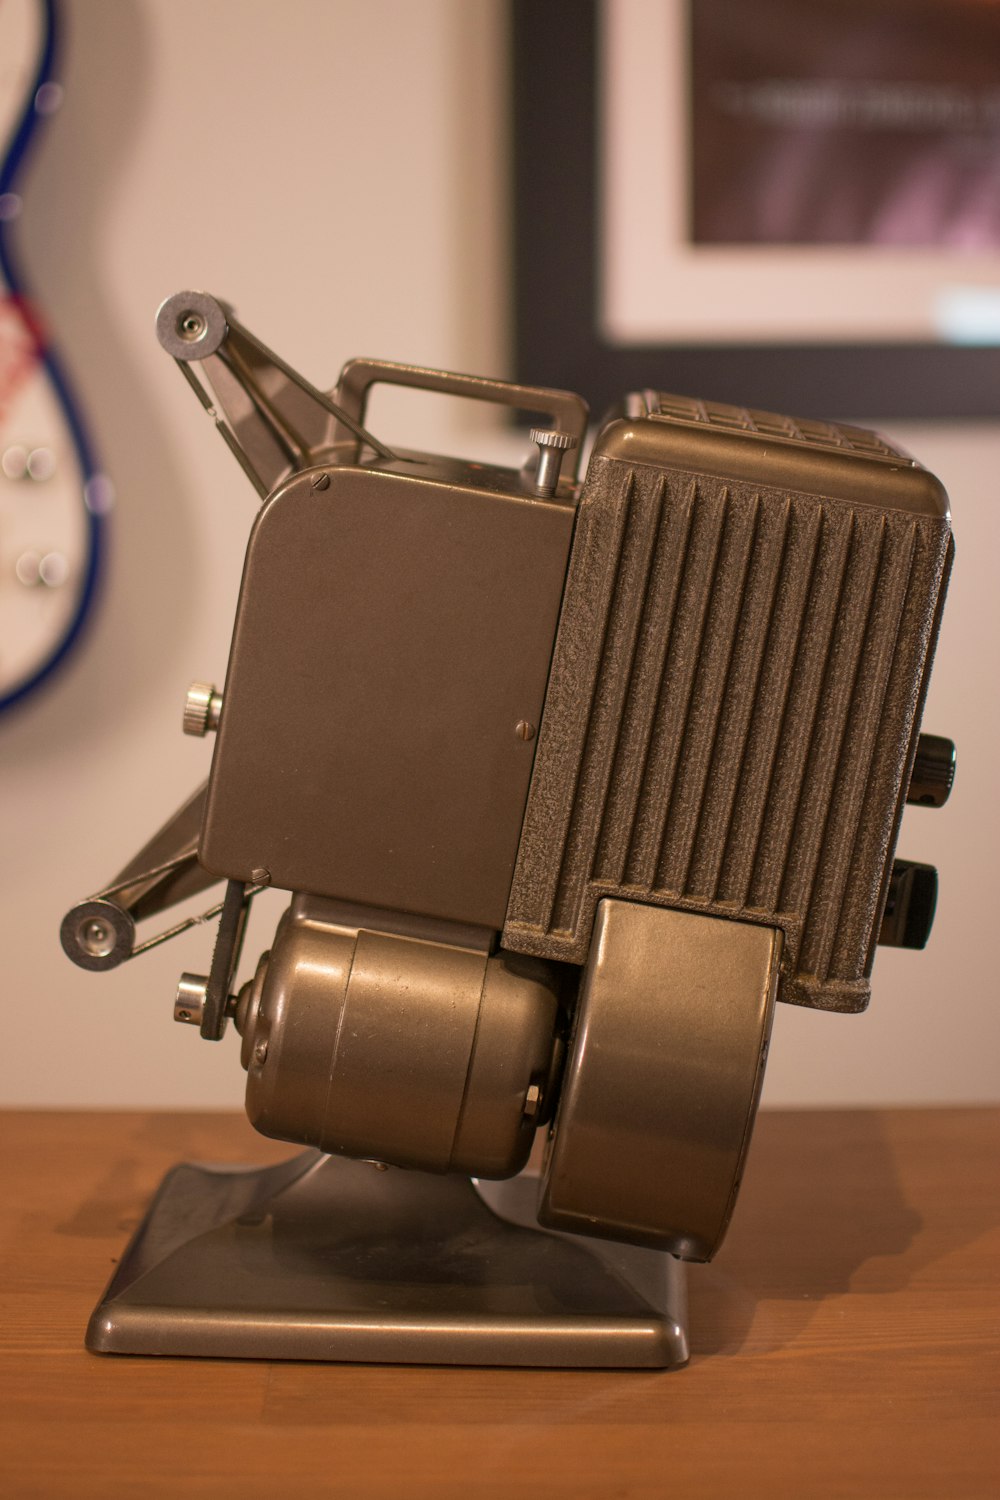 an old model of a camera sitting on a table